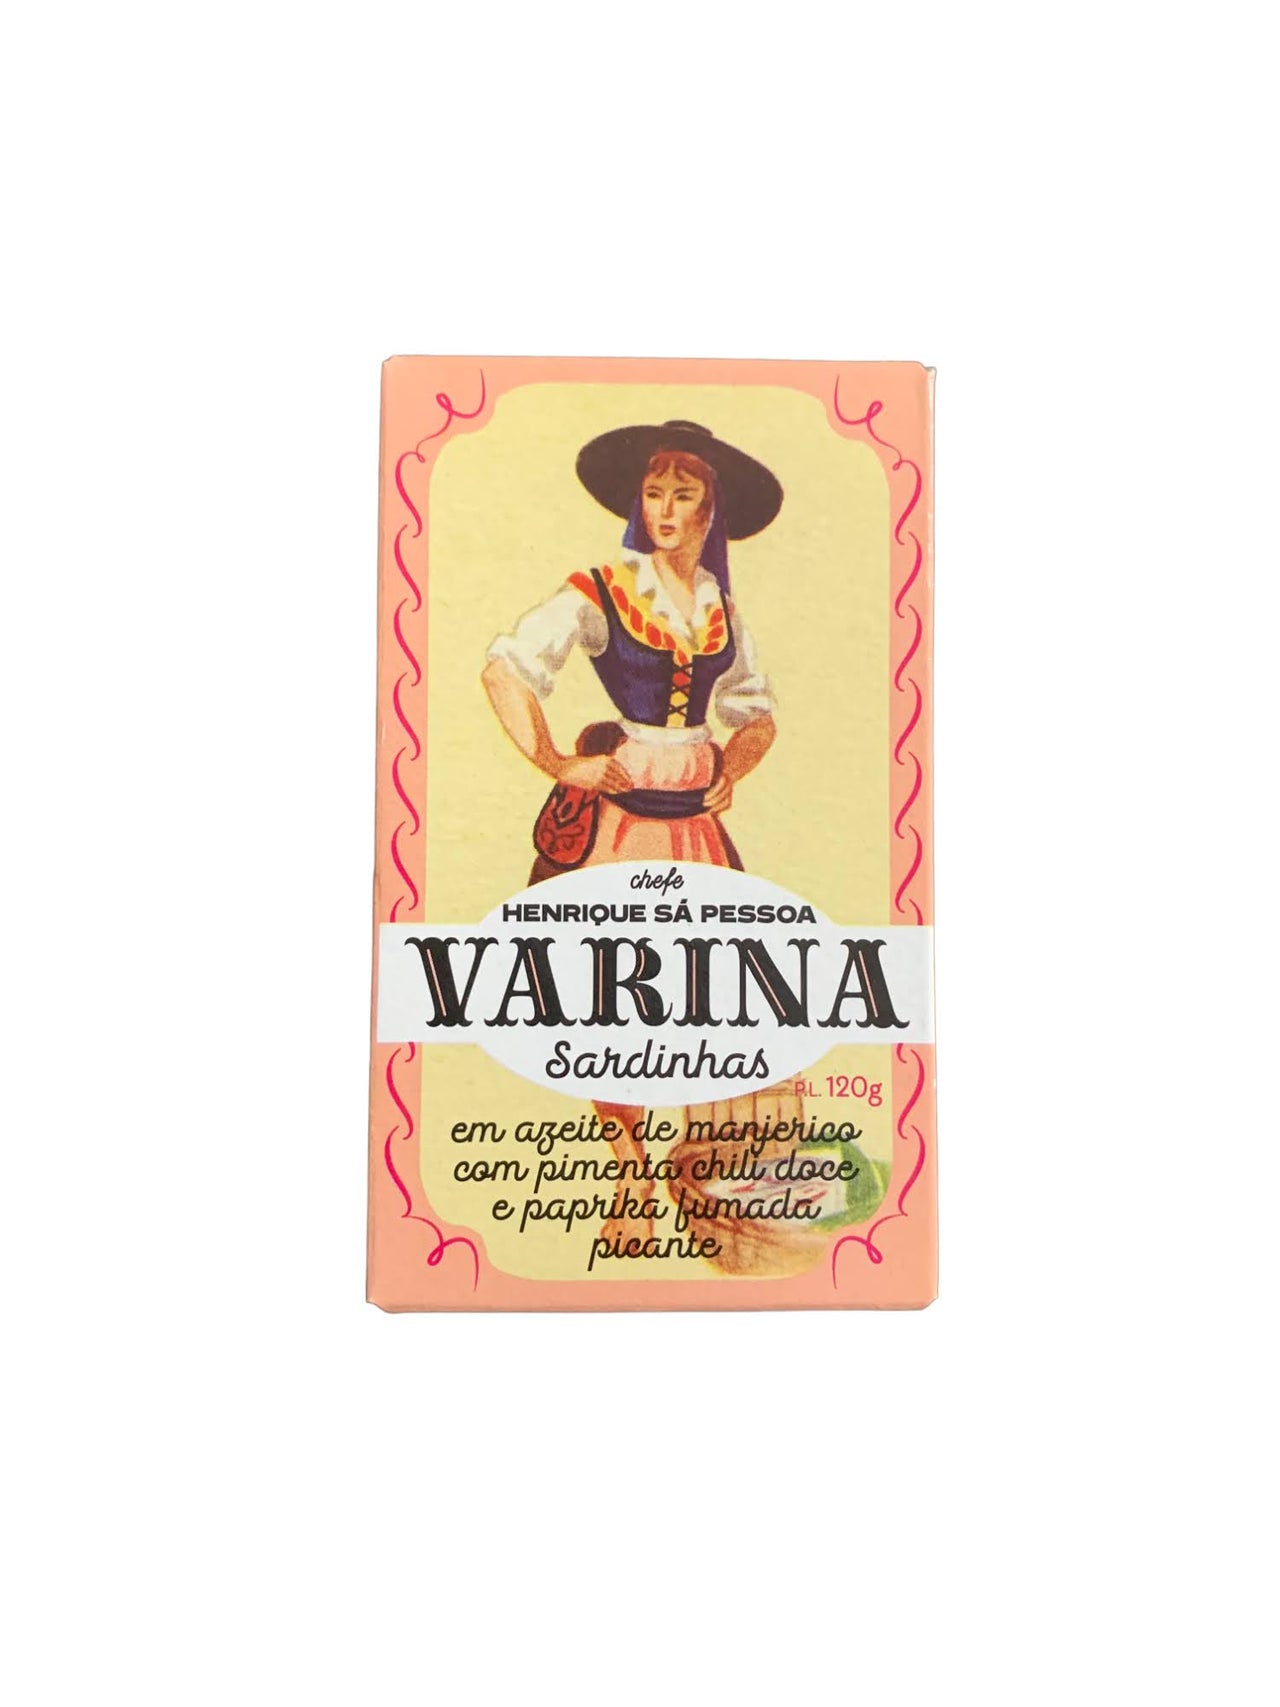 Varina Sardines in Basil Olive Oil w/ Sweet Chili Pepper and Spicy Smoked Paprika - 3 Pack - TinCanFish